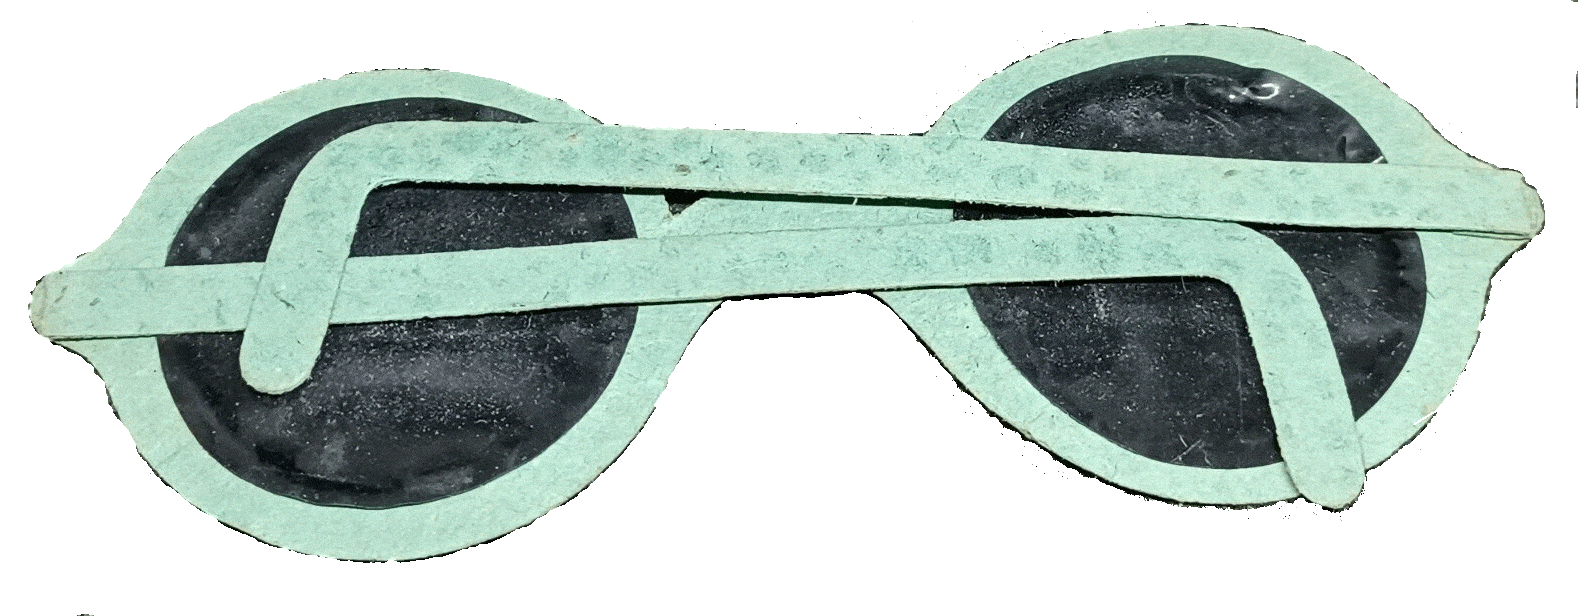 A pair of mint green glasses with black lenses.